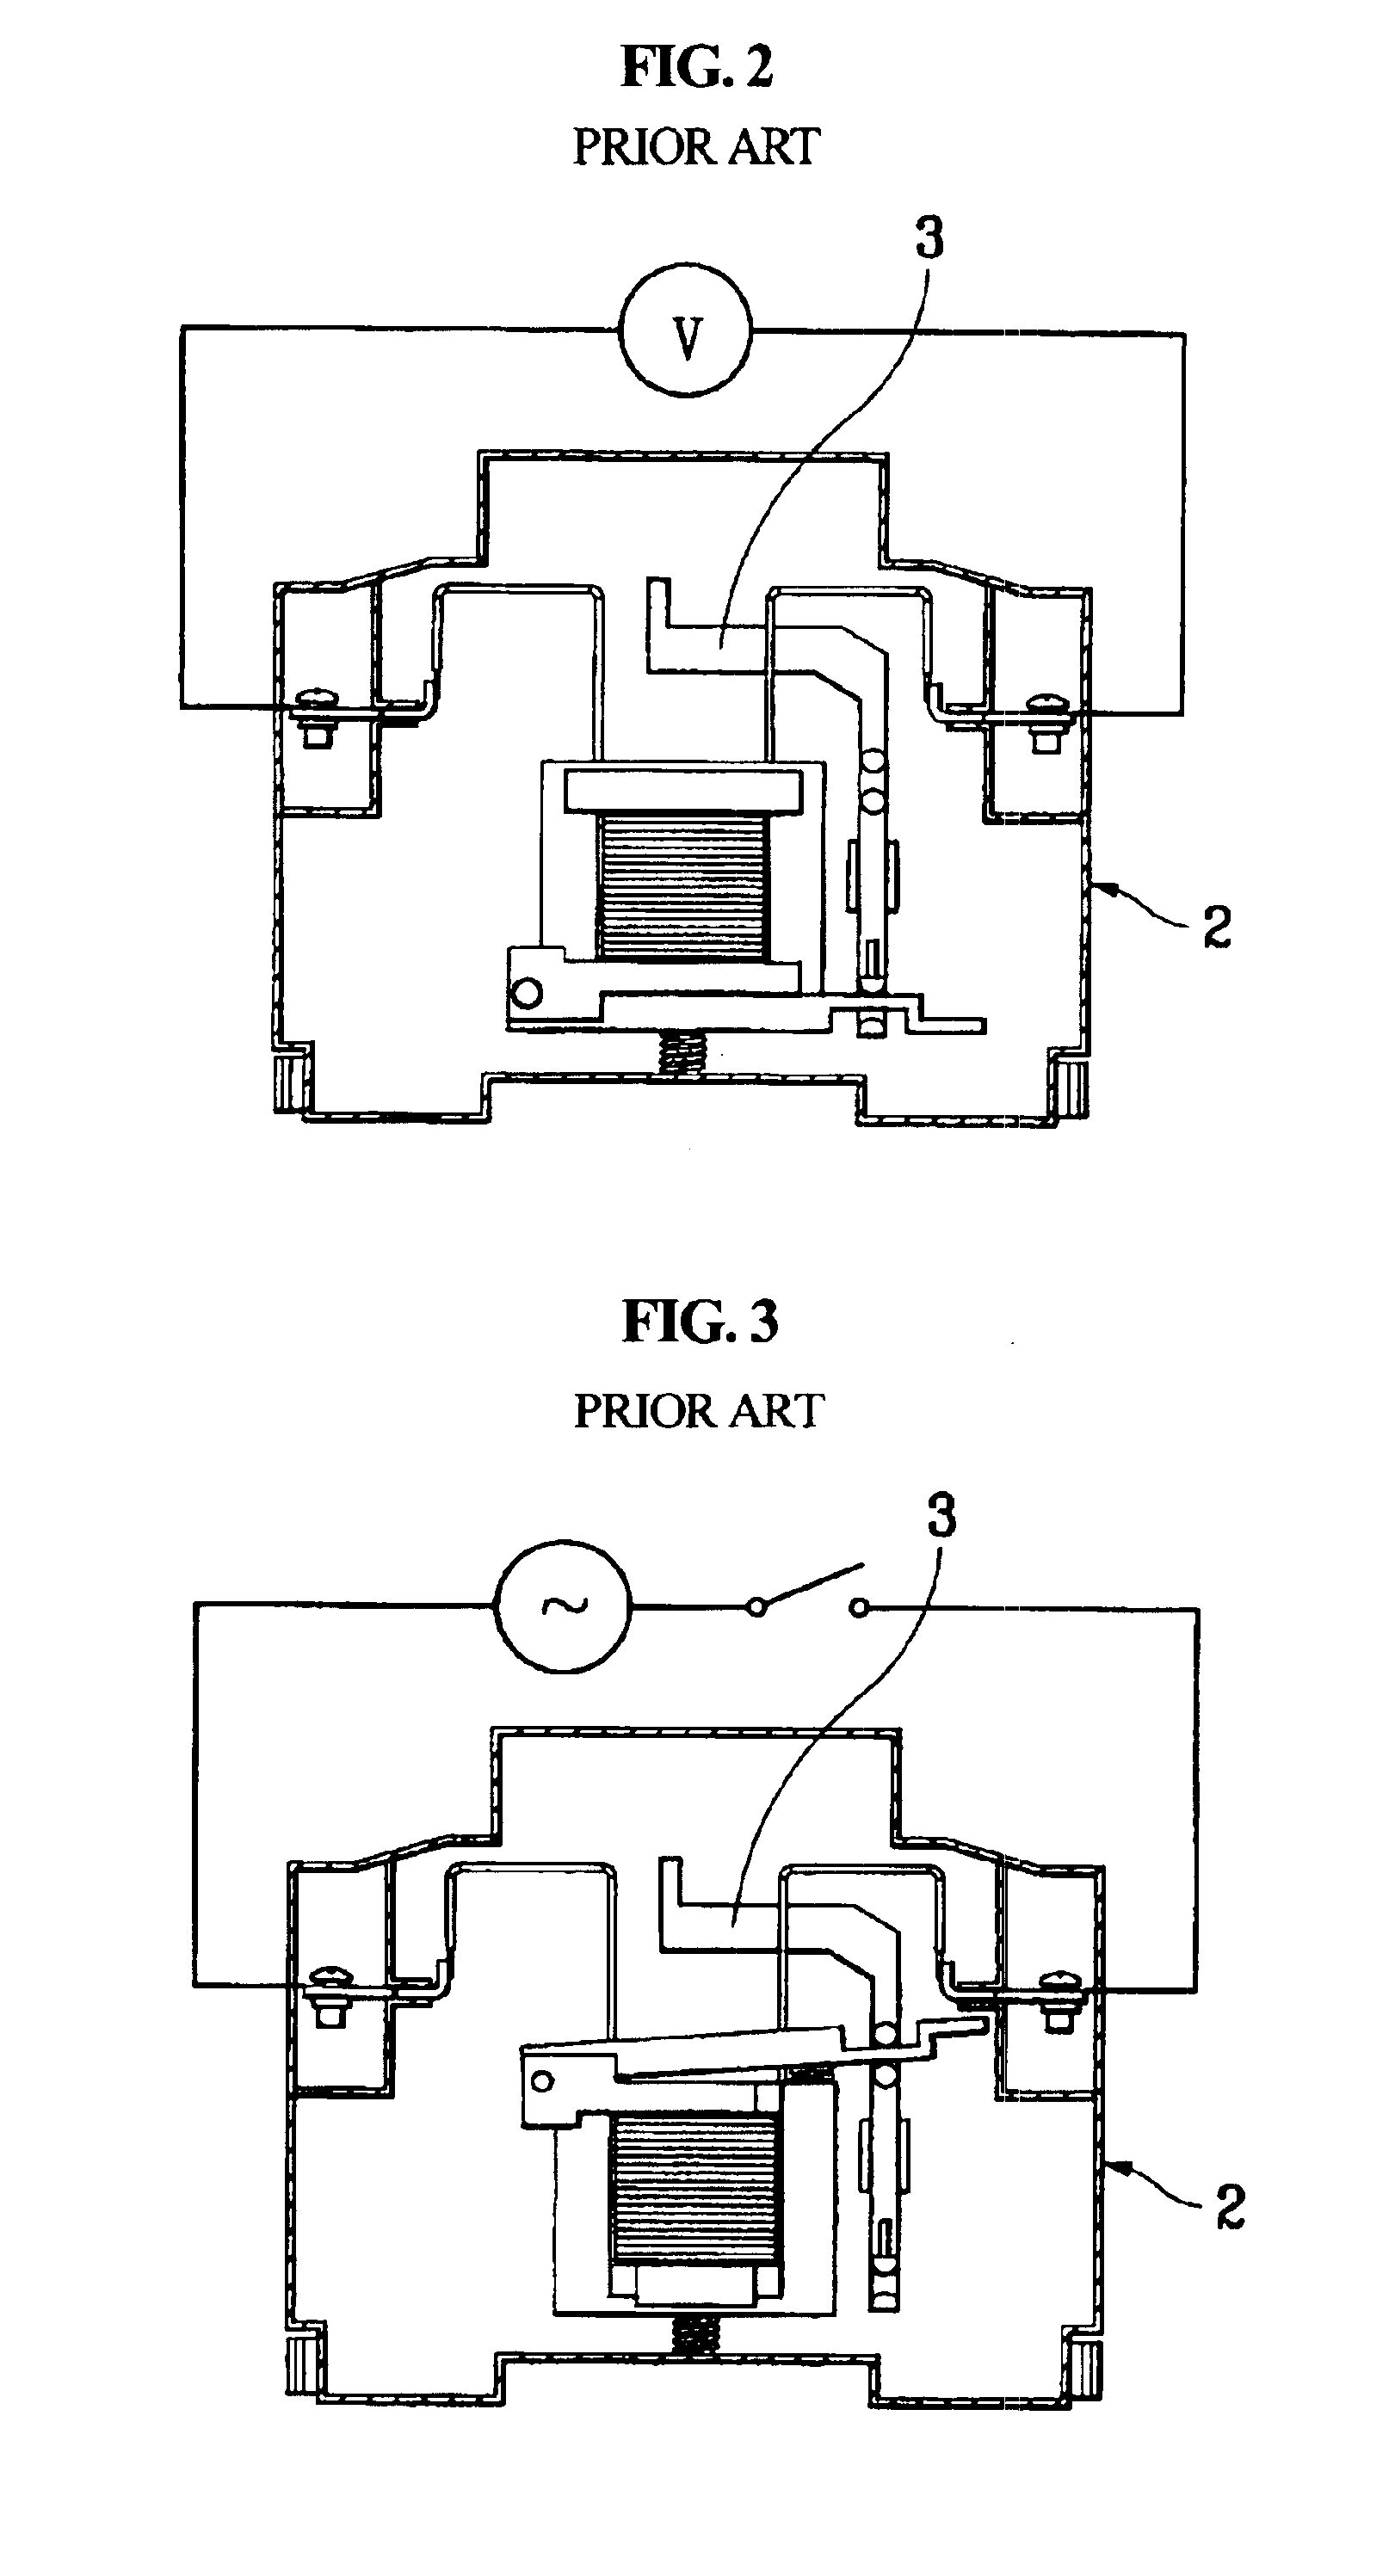 Accessory device for manual motor starter